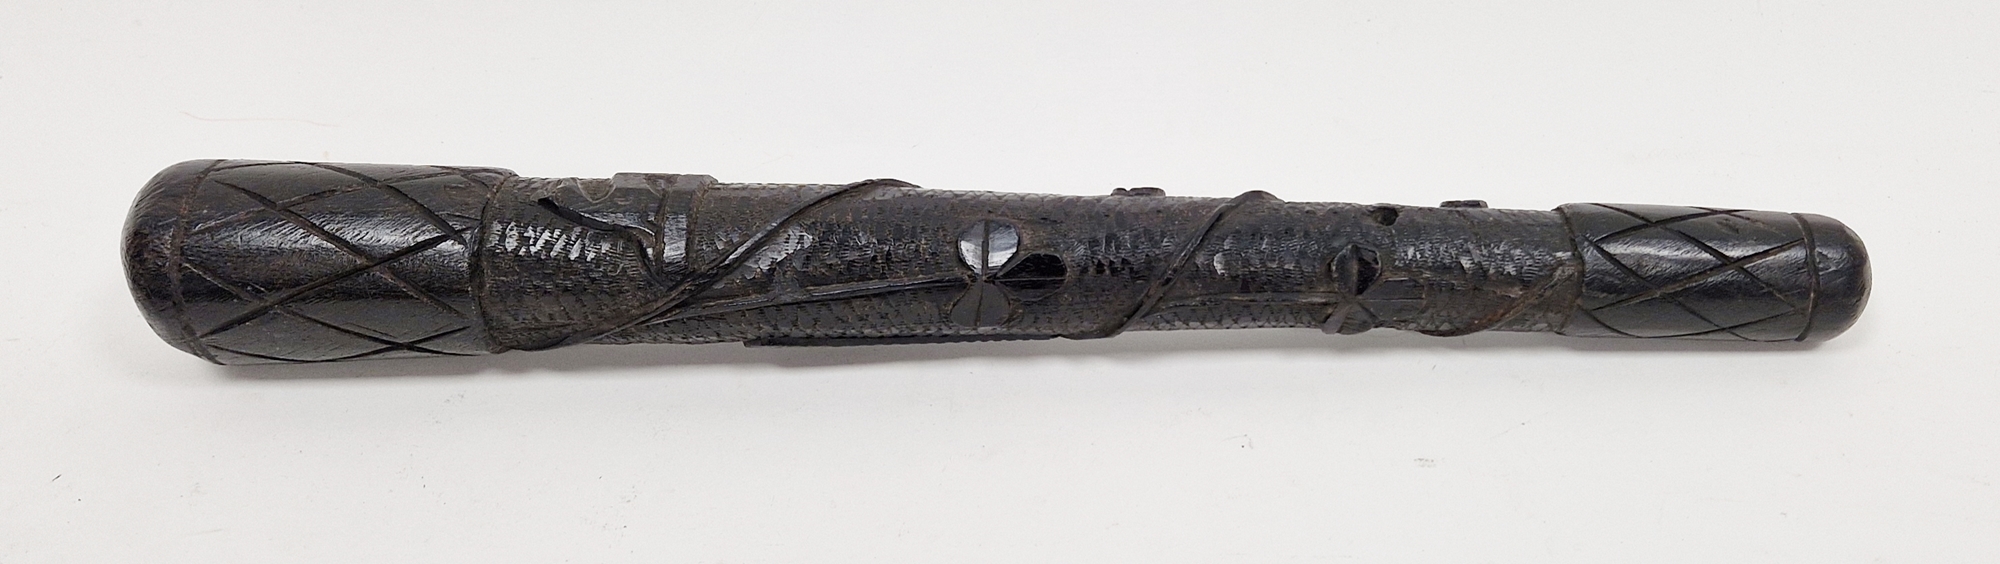 Late 19th century Irish bog oak carved salmon priest, carved with shamrocks and a harp, 43cm long